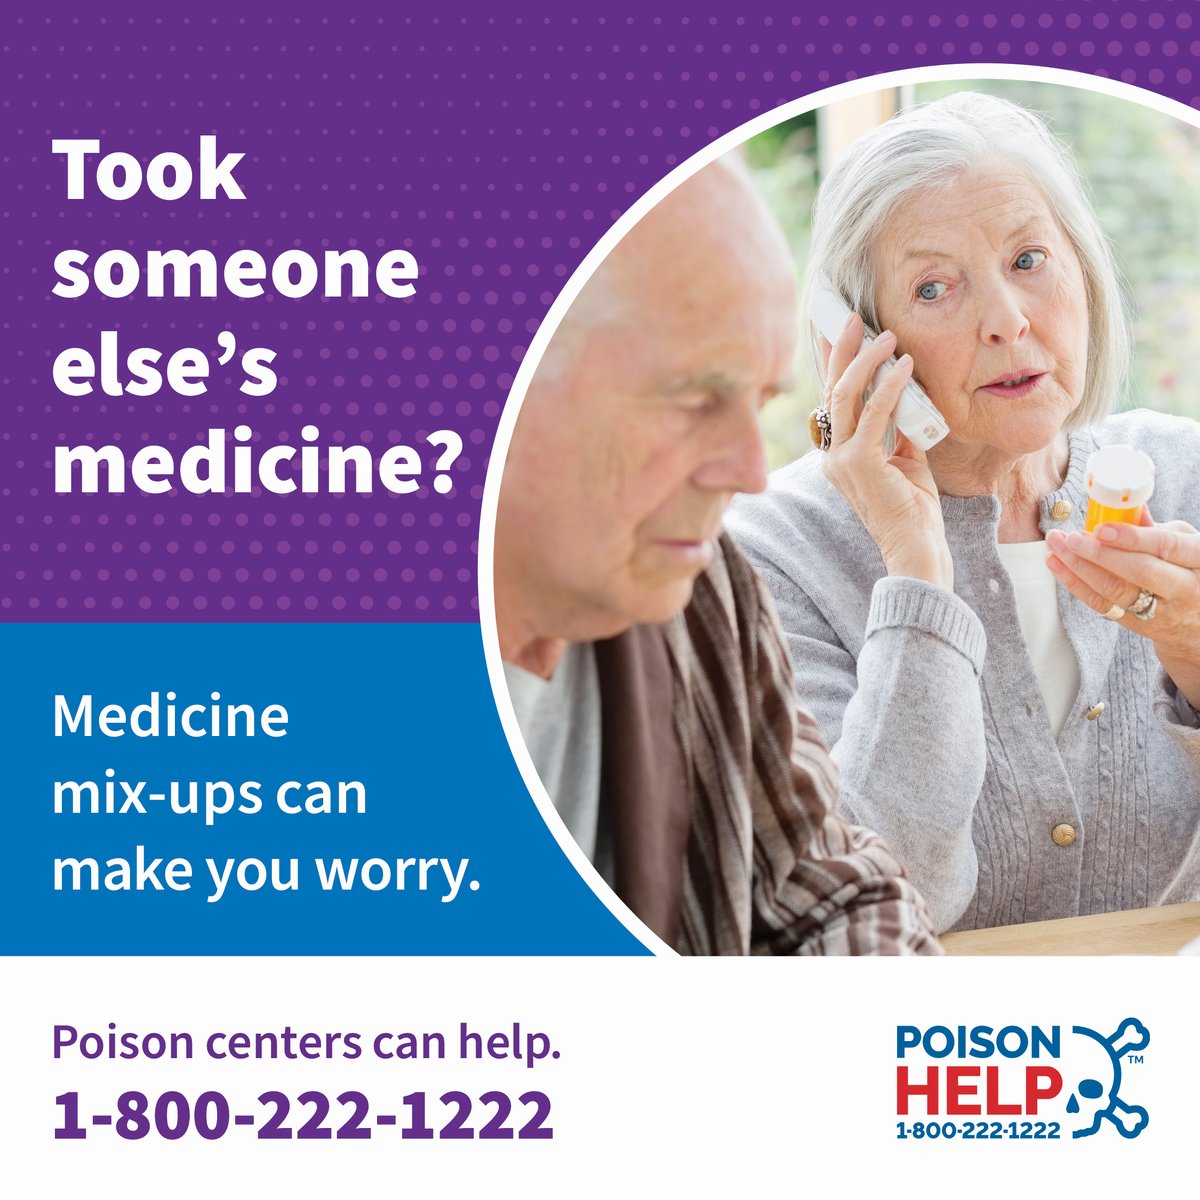 Medicine mistake? We can help: 1-800-222-1222. Our specially trained nurses and pharmacists are available 24/7/365                                #PreventPoison #PoisonHelp